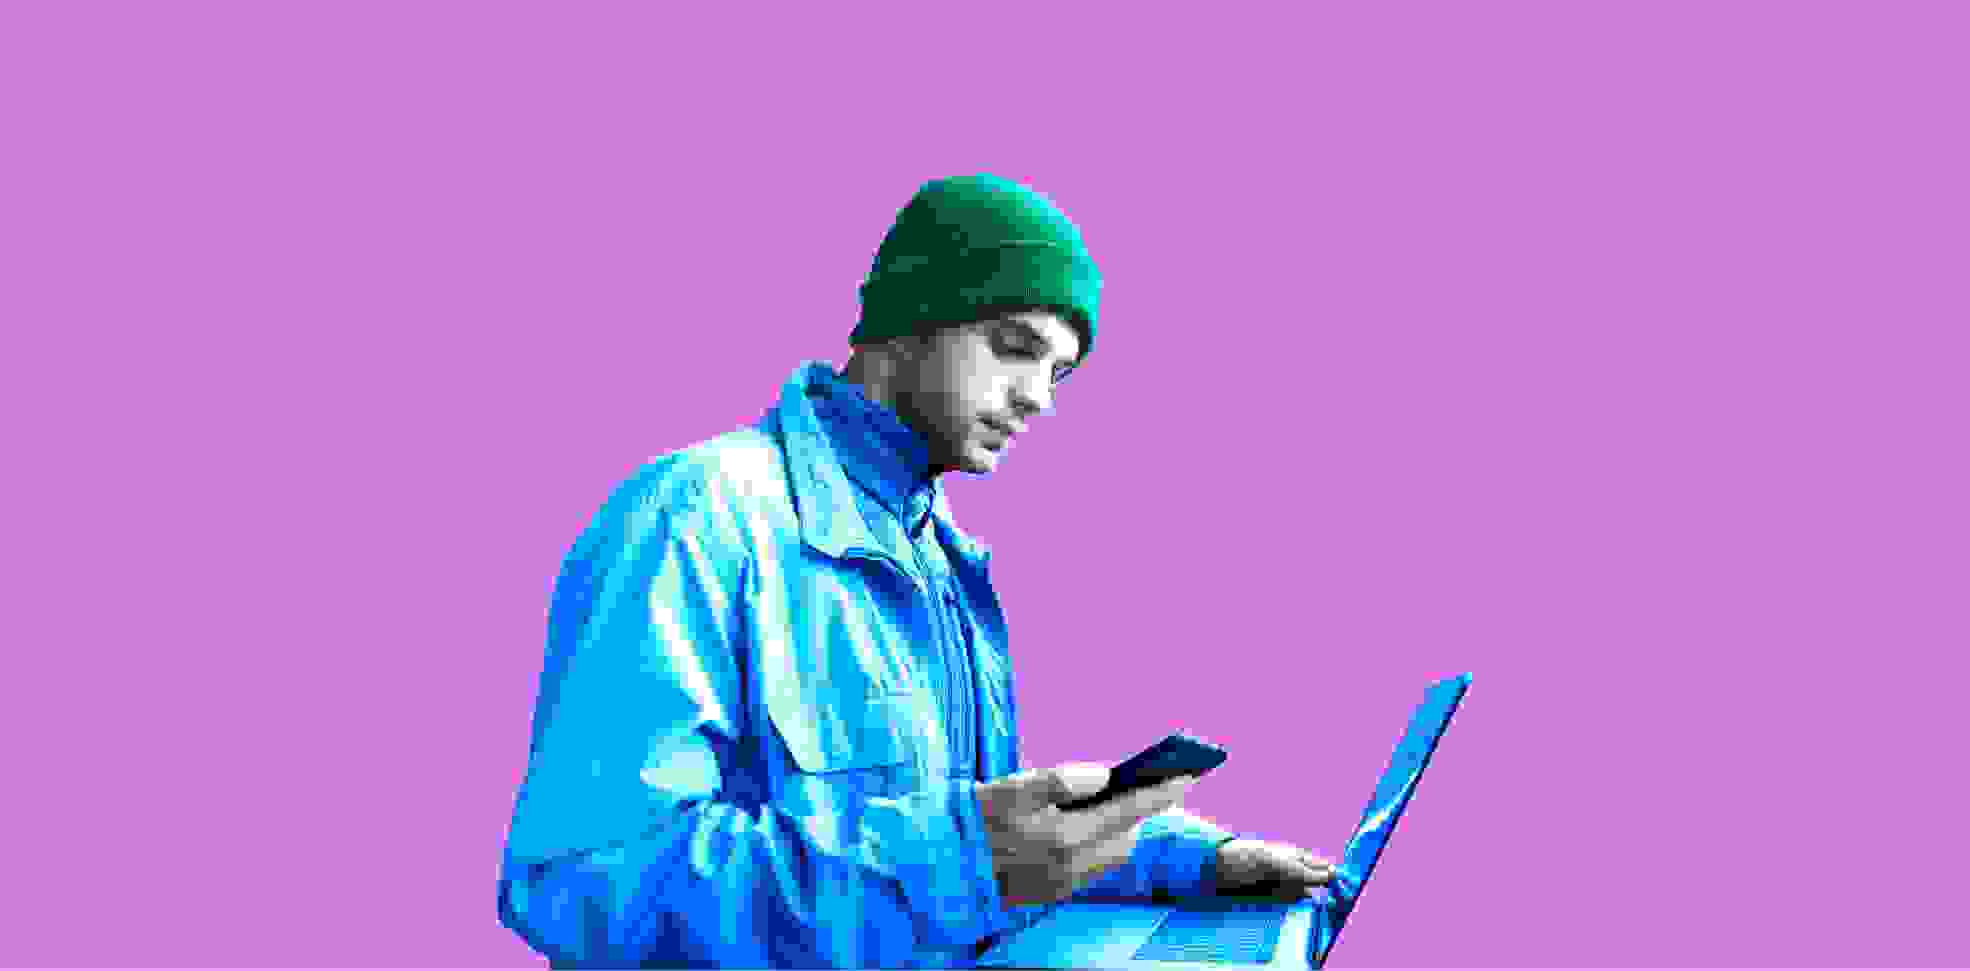 developer with a laptop and a phone on purple background